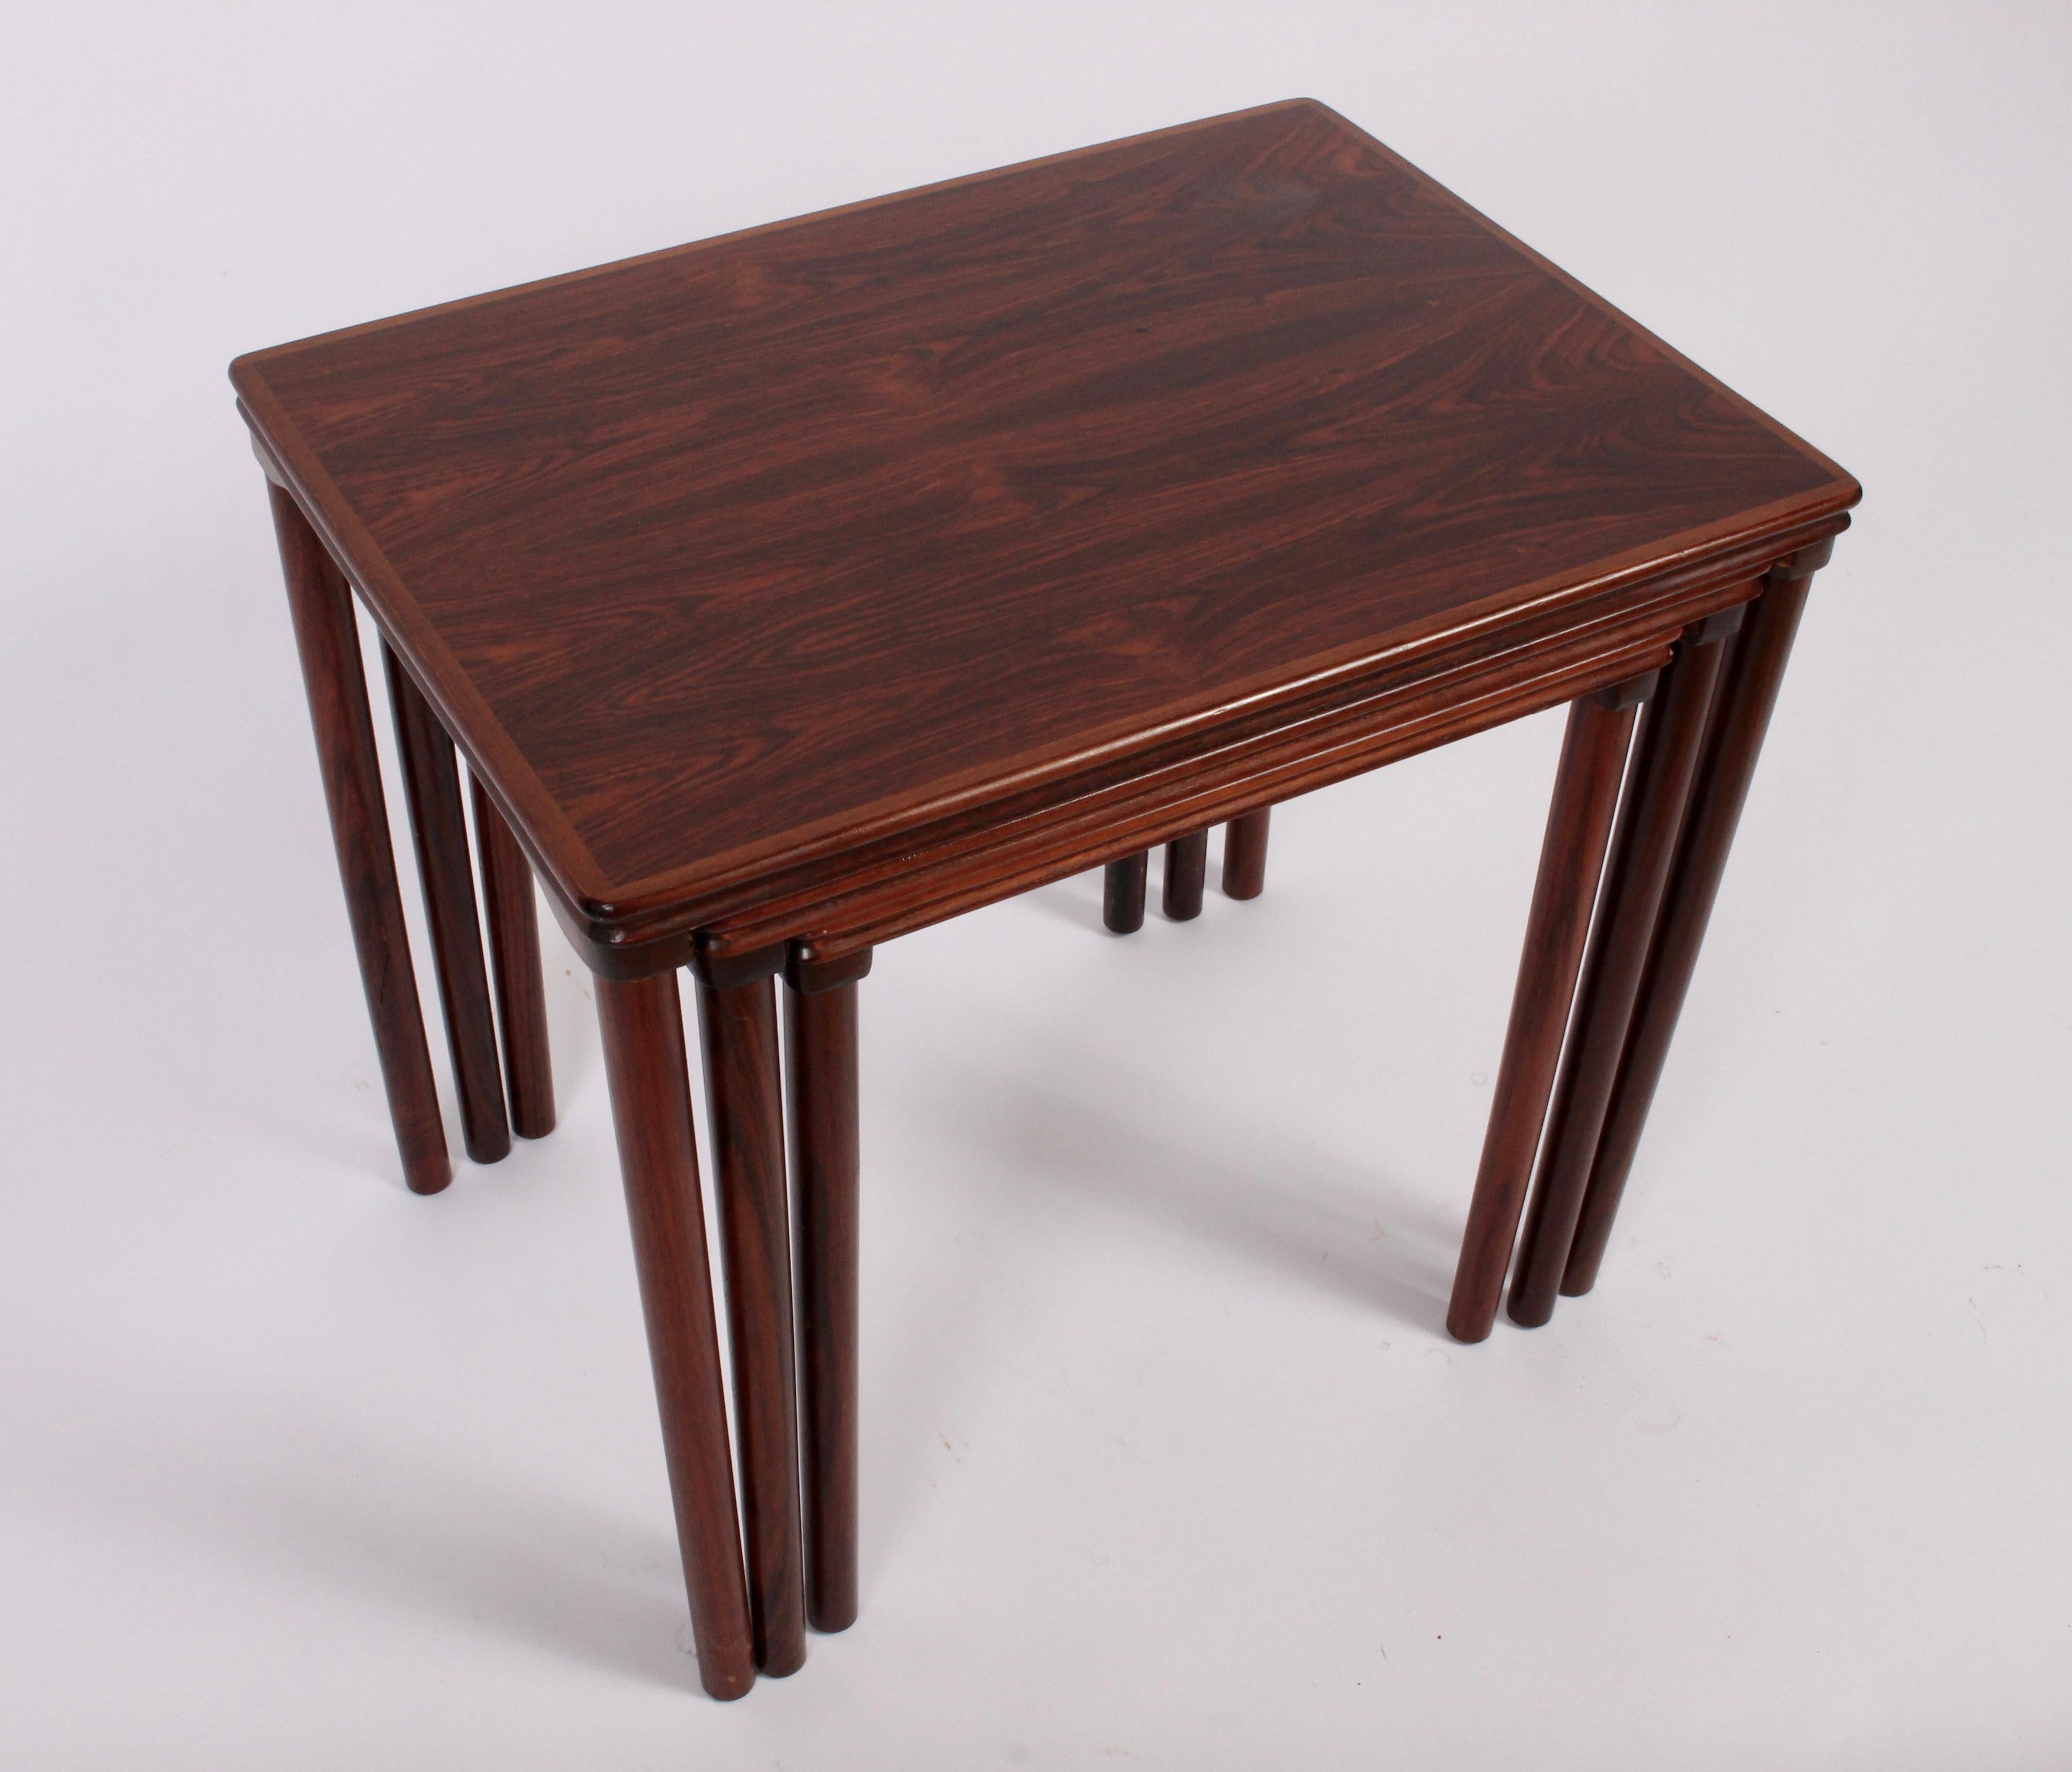 Set of 3 Scandinavian Modern Solid Rosewood Nesting Tables from the 1960's. Featuring three graduating tables with rounded corners. Exquisite grain.  Measurements: Outer Table: (19 H x 16 D x 21 W). Middle: (18 H x 15.5 D x 18 W). Lower: (17 H x